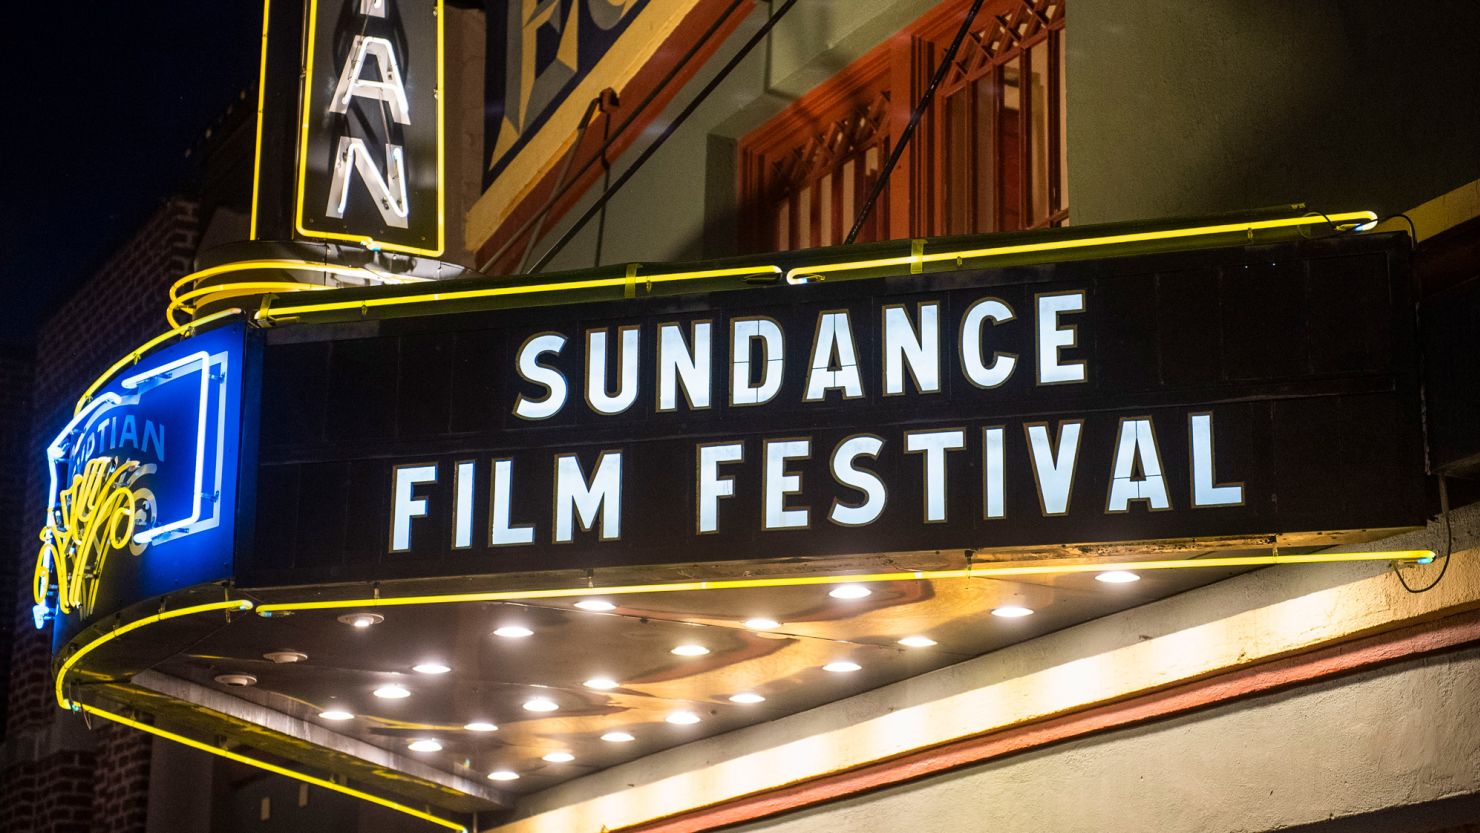 FILE - The marquee of the Egyptian Theatre appears during the Sundance Film Festival in Park City, Utah on Jan. 28, 2020.  The Sundance Film Festival is cancelling its in-person festival and reverting to an entirely virtual edition due to the current coronavirus surge. Festival organizers announced Wednesday, Jan 5, 2022, that the festival will start as scheduled on Jan. 20, but will shift online. Last year's Sundance was also held virtually because of the pandemic.  (Photo by Arthur Mola/Invision/AP, File)